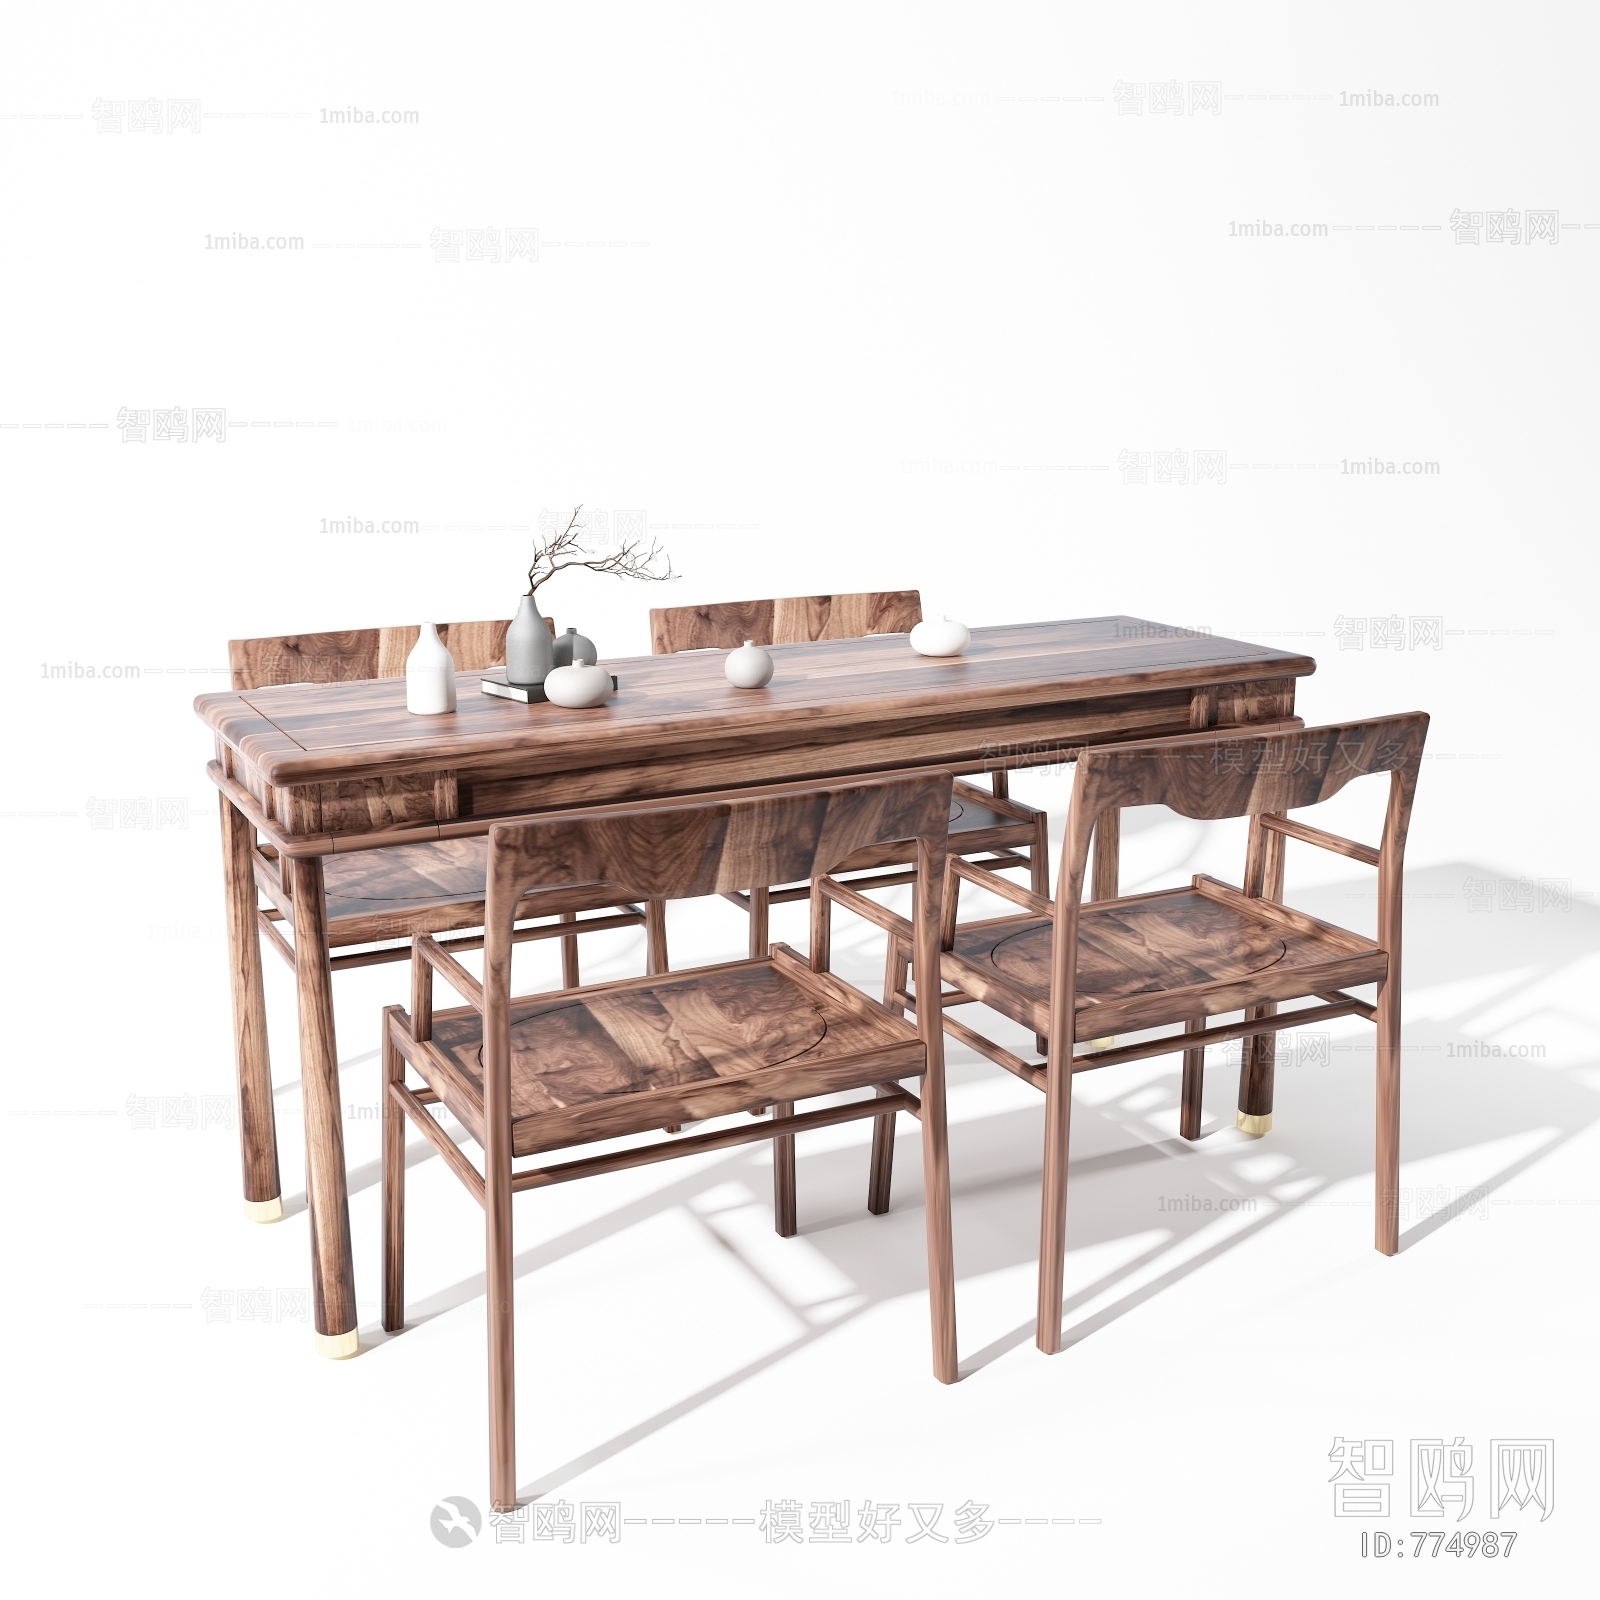 New Chinese Style Tea Tables And Chairs